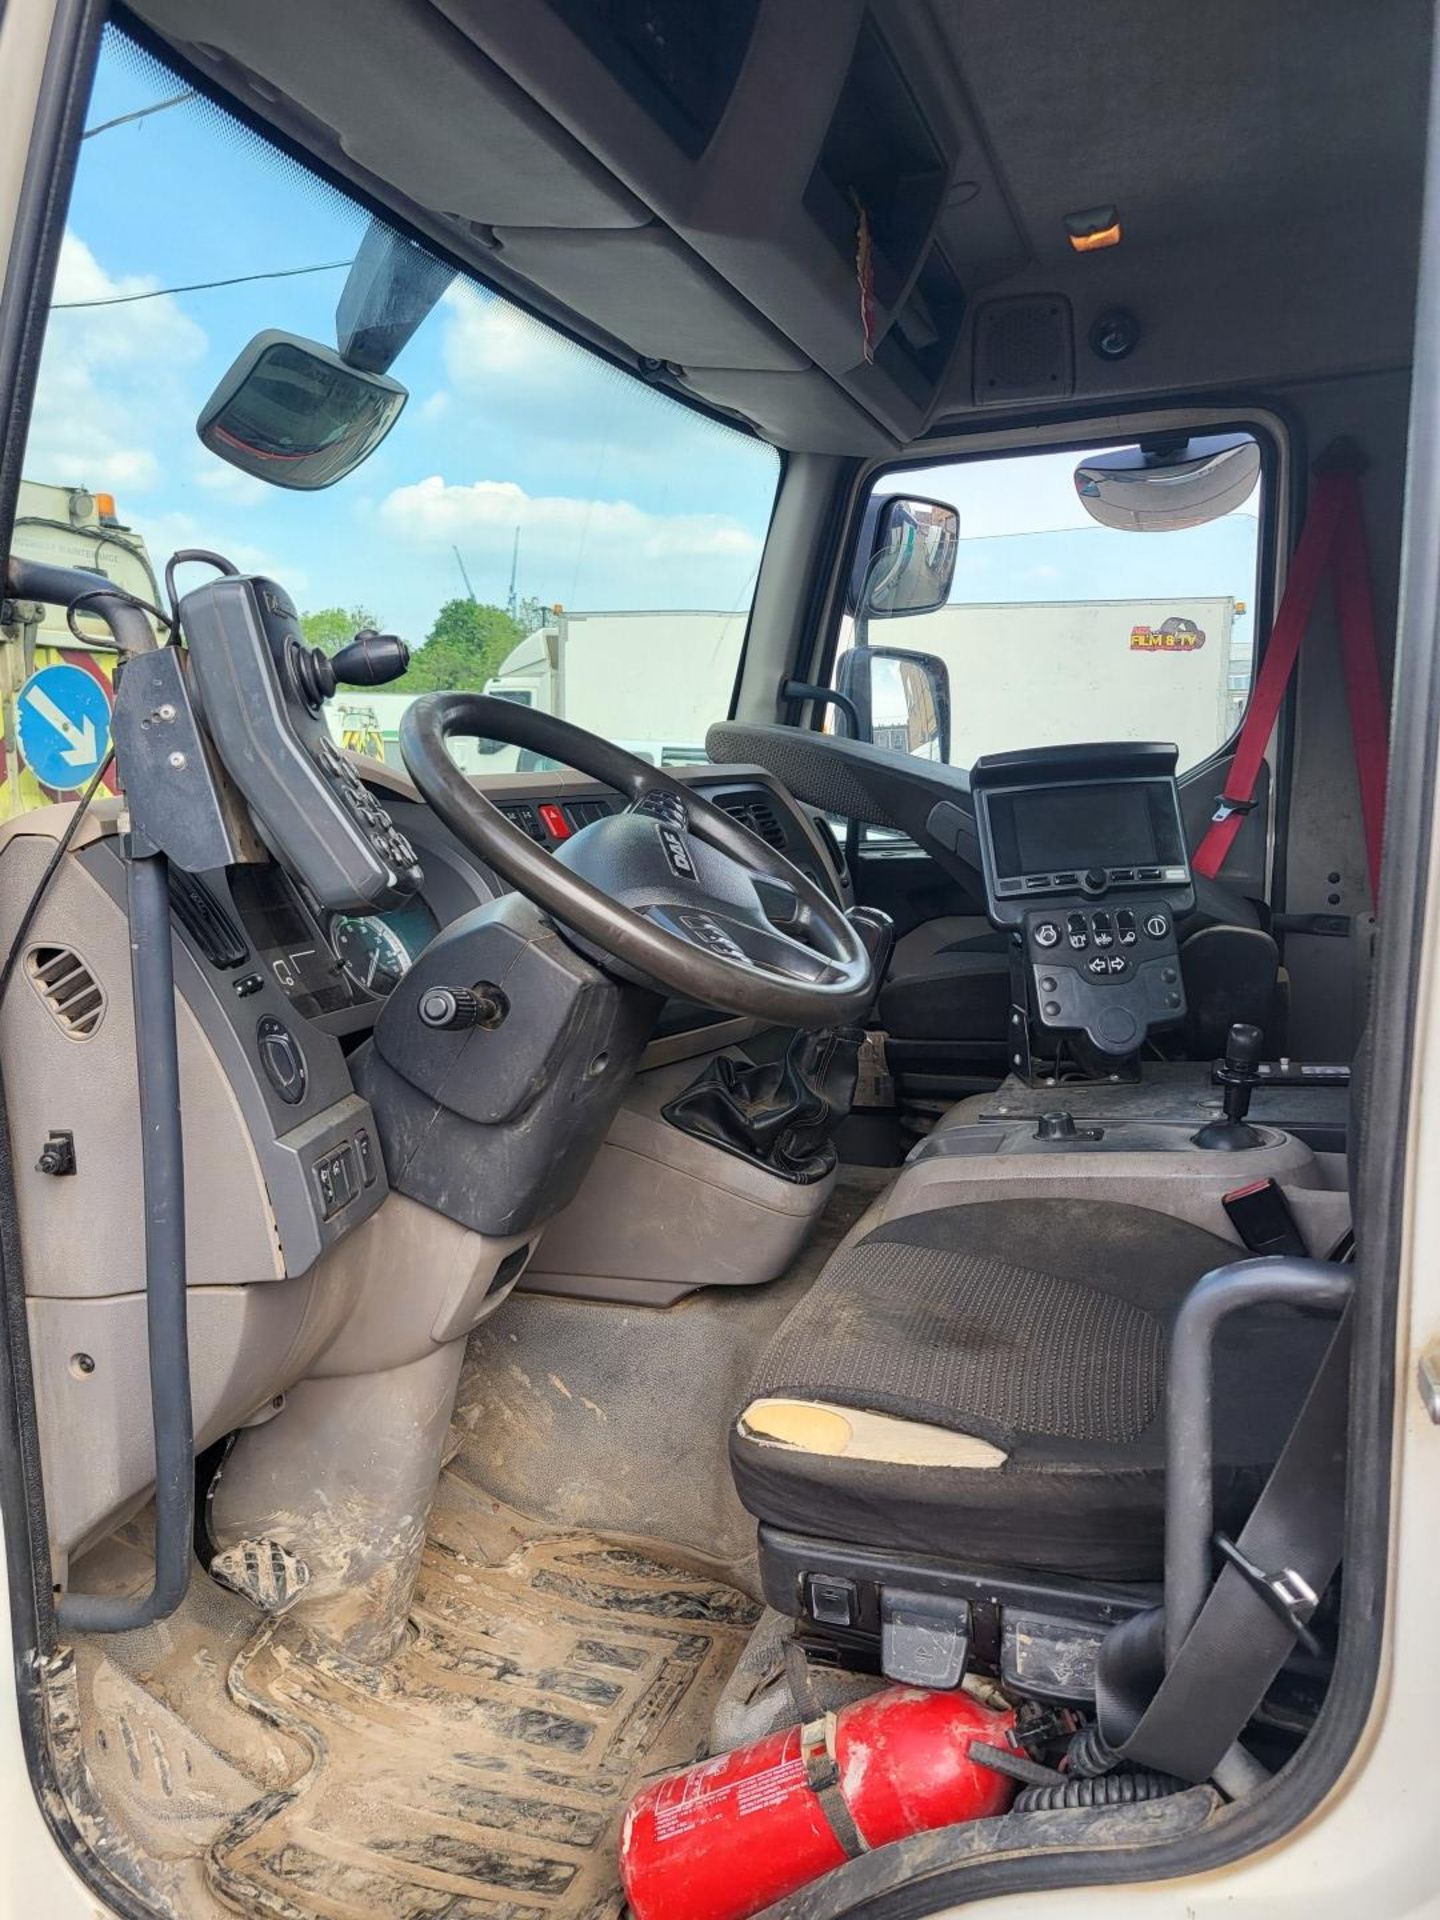 2016 DAF LF 220 FA 16T SWEEP Johnston VT651 - Truck Mounted Sweeper - Image 9 of 11